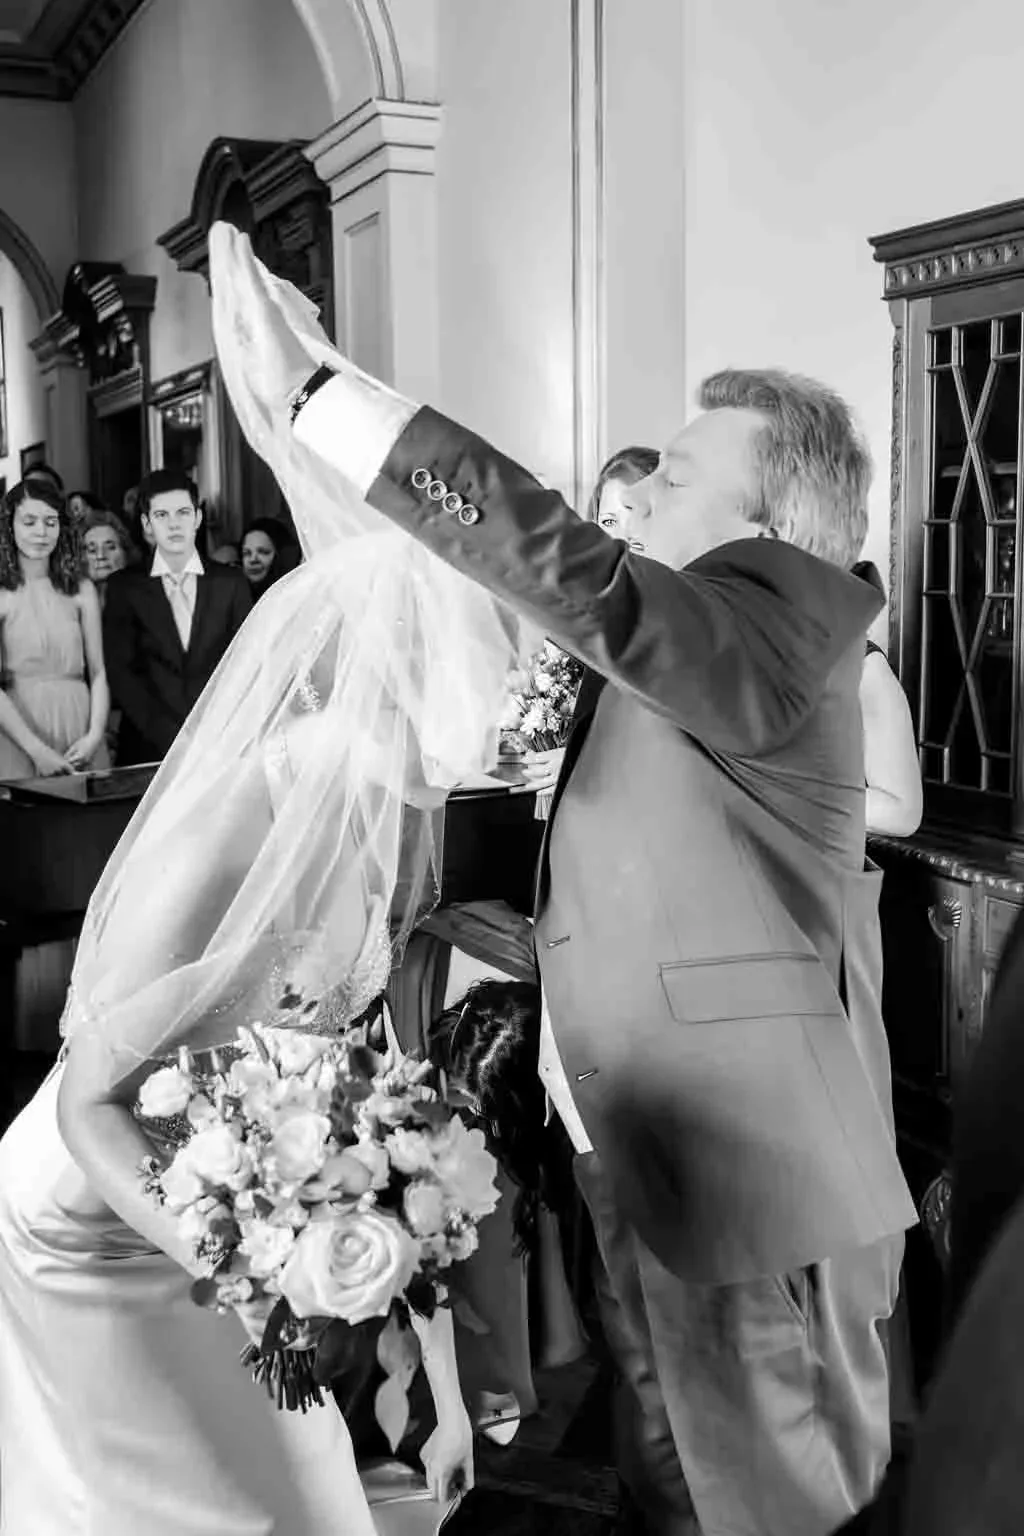 Personalise the wedding day at Orchardleigh House Weddings: a bride and groom dancing in front of a crowd.